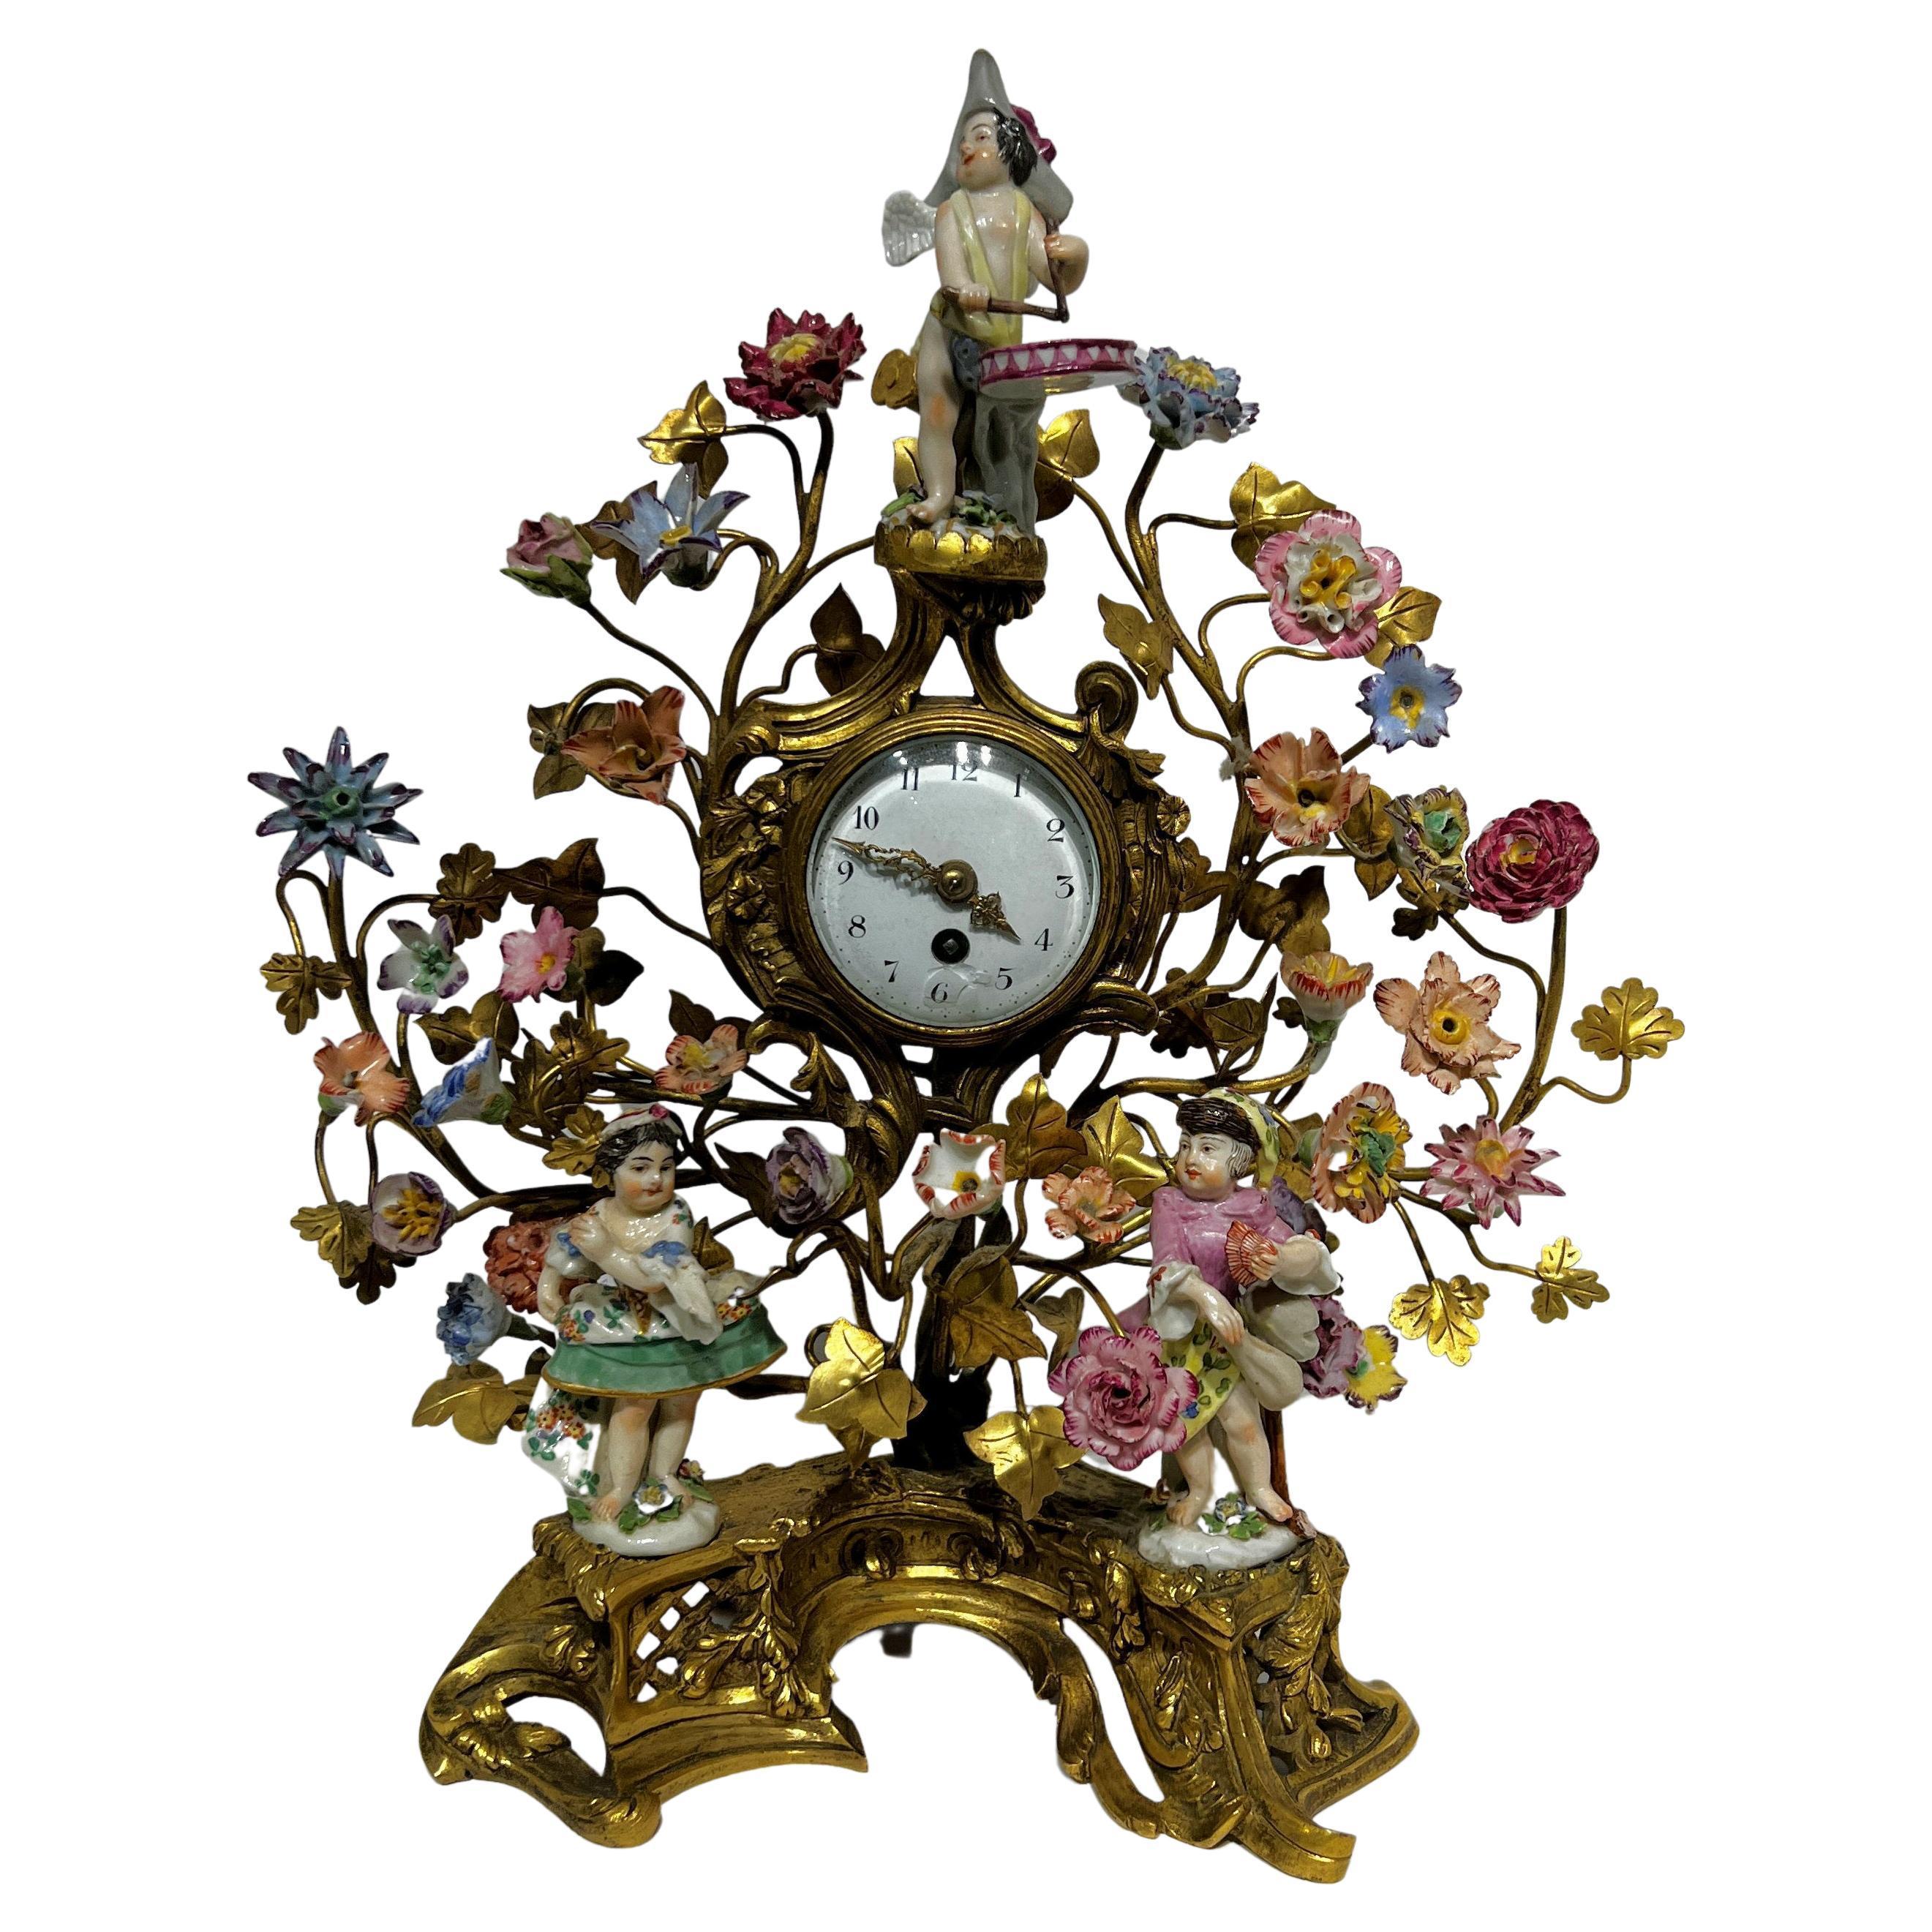 Very fine quality French 19 century Louis XV style gilt bronze and porcelain Figurative Clock.
With porcelain figures and flowers.